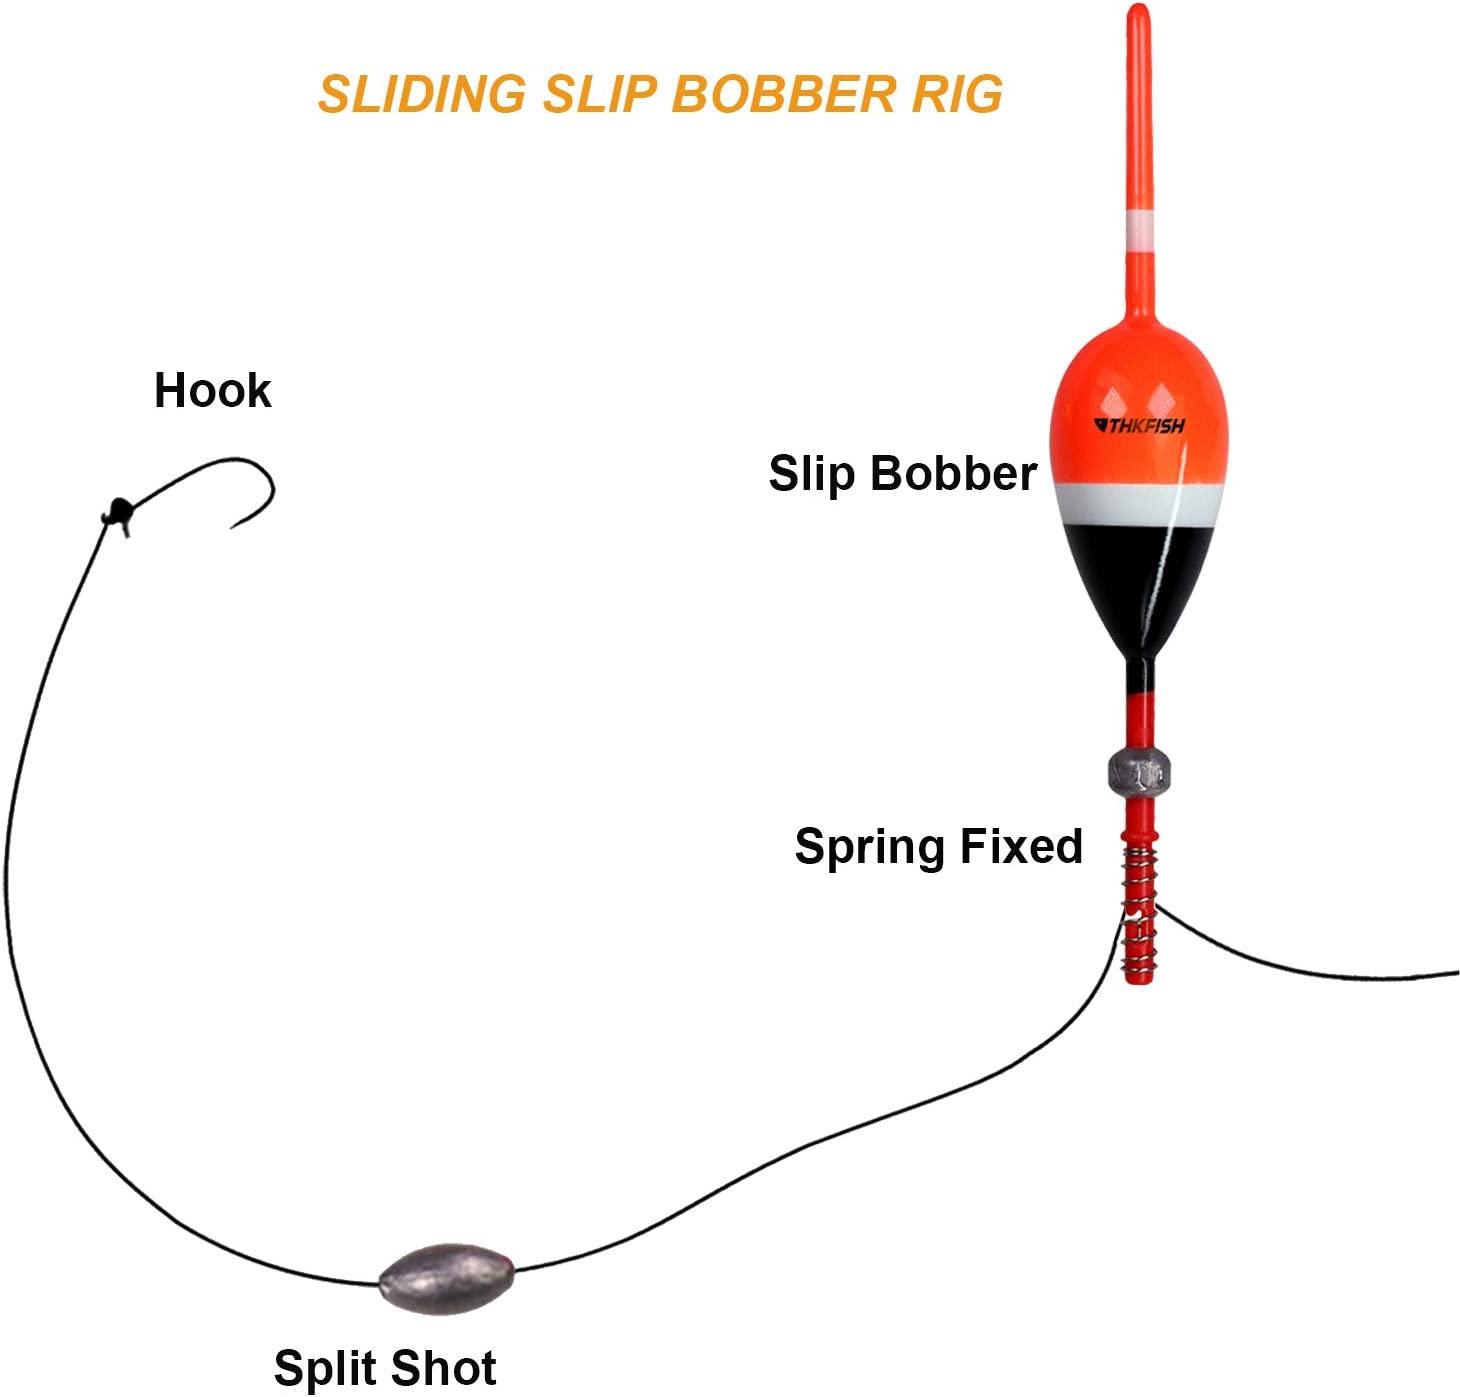 Using a slip-bobber set up to fish for silver salmon on Vimeo